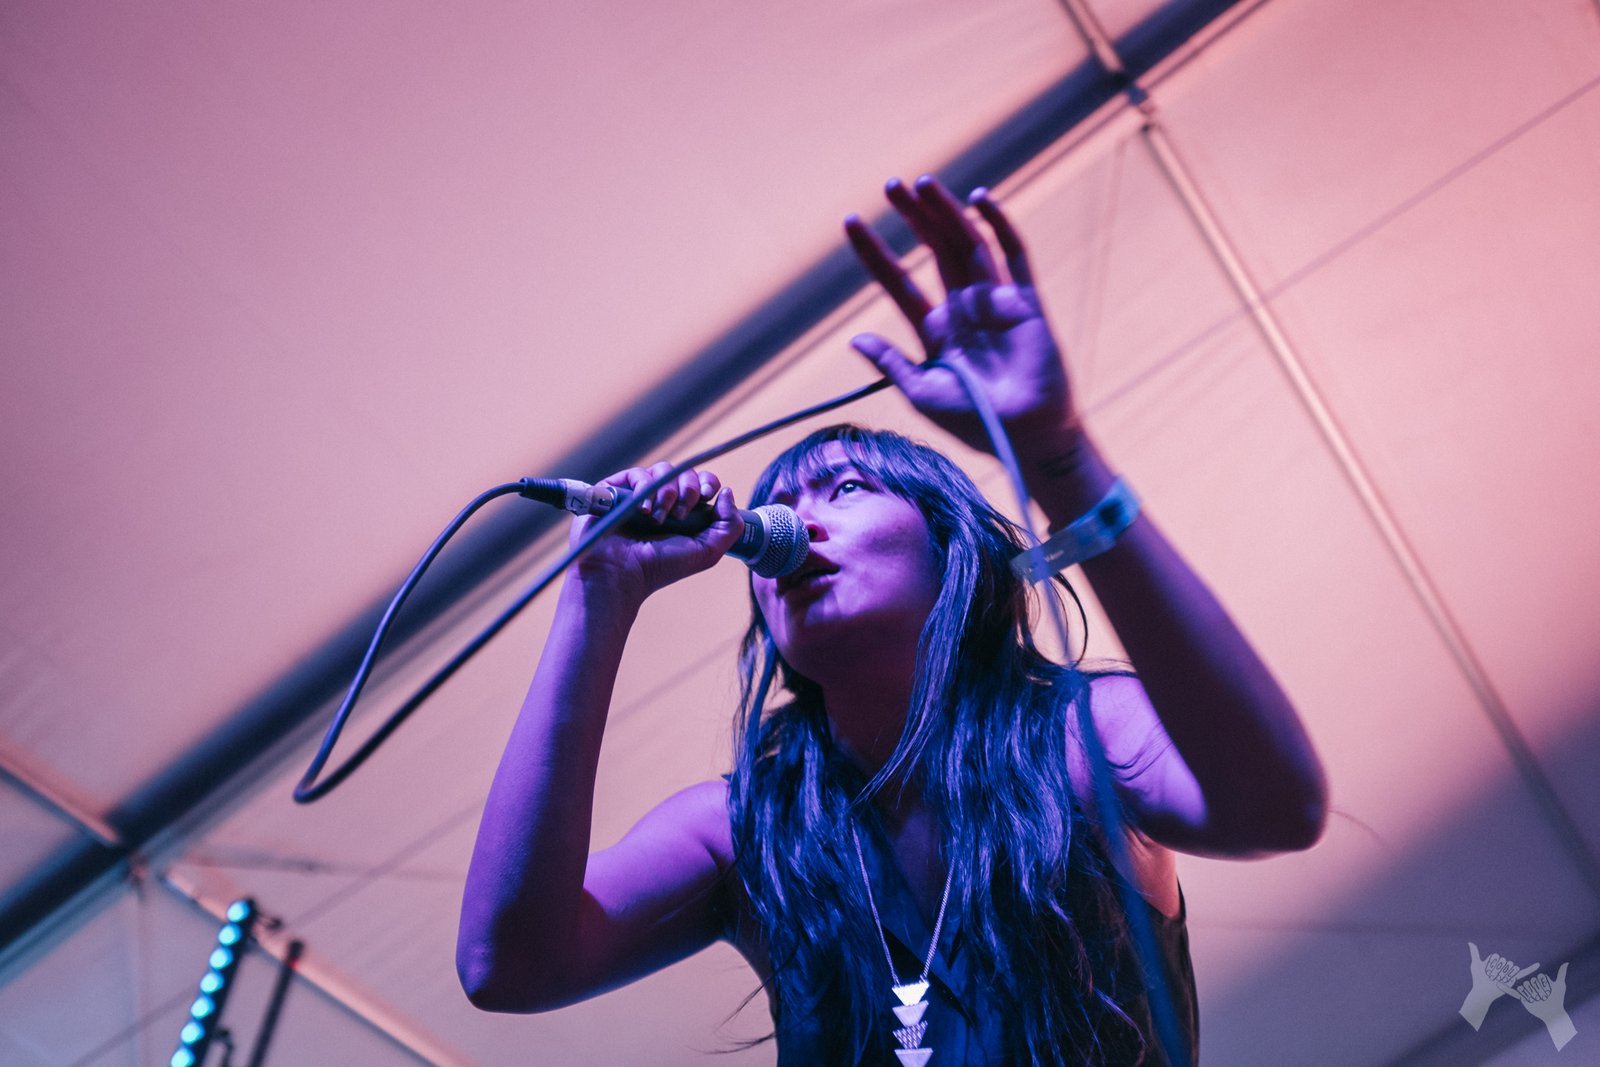 Thao & The Get Down Stay Down at Desert Daze 2016